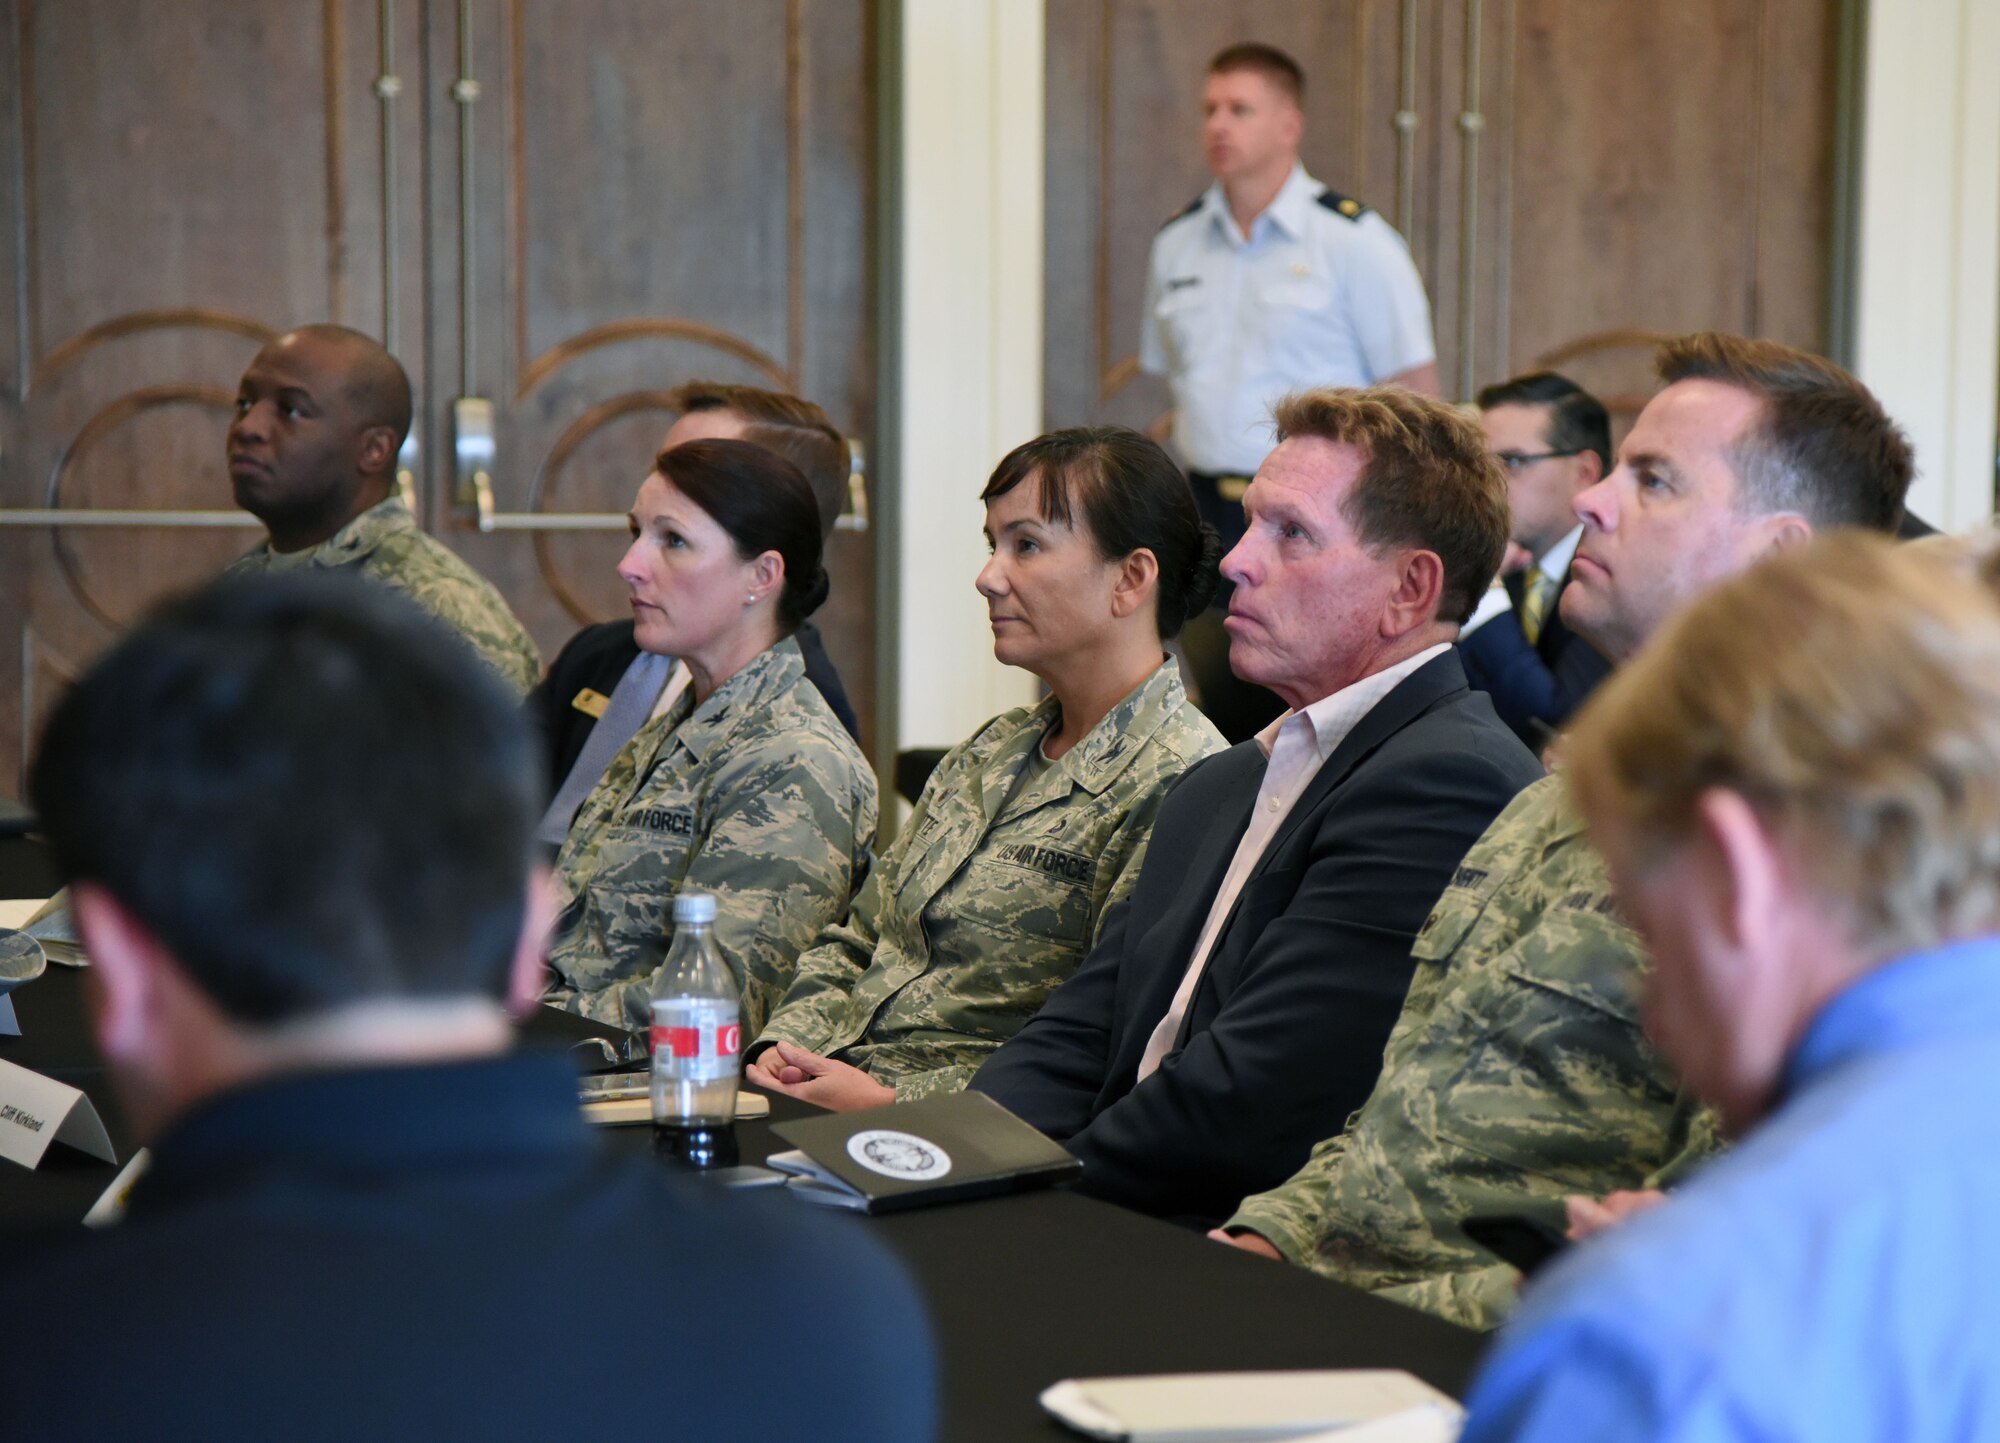 Keesler and community leaders attend the Keesler/Mississippi Gulf Coast Community Partnership Workshop at the Salvation Army Kroc Center in Biloxi, Mississippi, Oct. 10, 2018. The program is part of a larger Air Force Public-Public, Public-Private initiative to encourage installations and local communities to combine or improve resources or operating processes. Mississippi representatives from state and local communities and various civic leaders attended the event. (U.S. Air Force photo by Kemberly Groue)